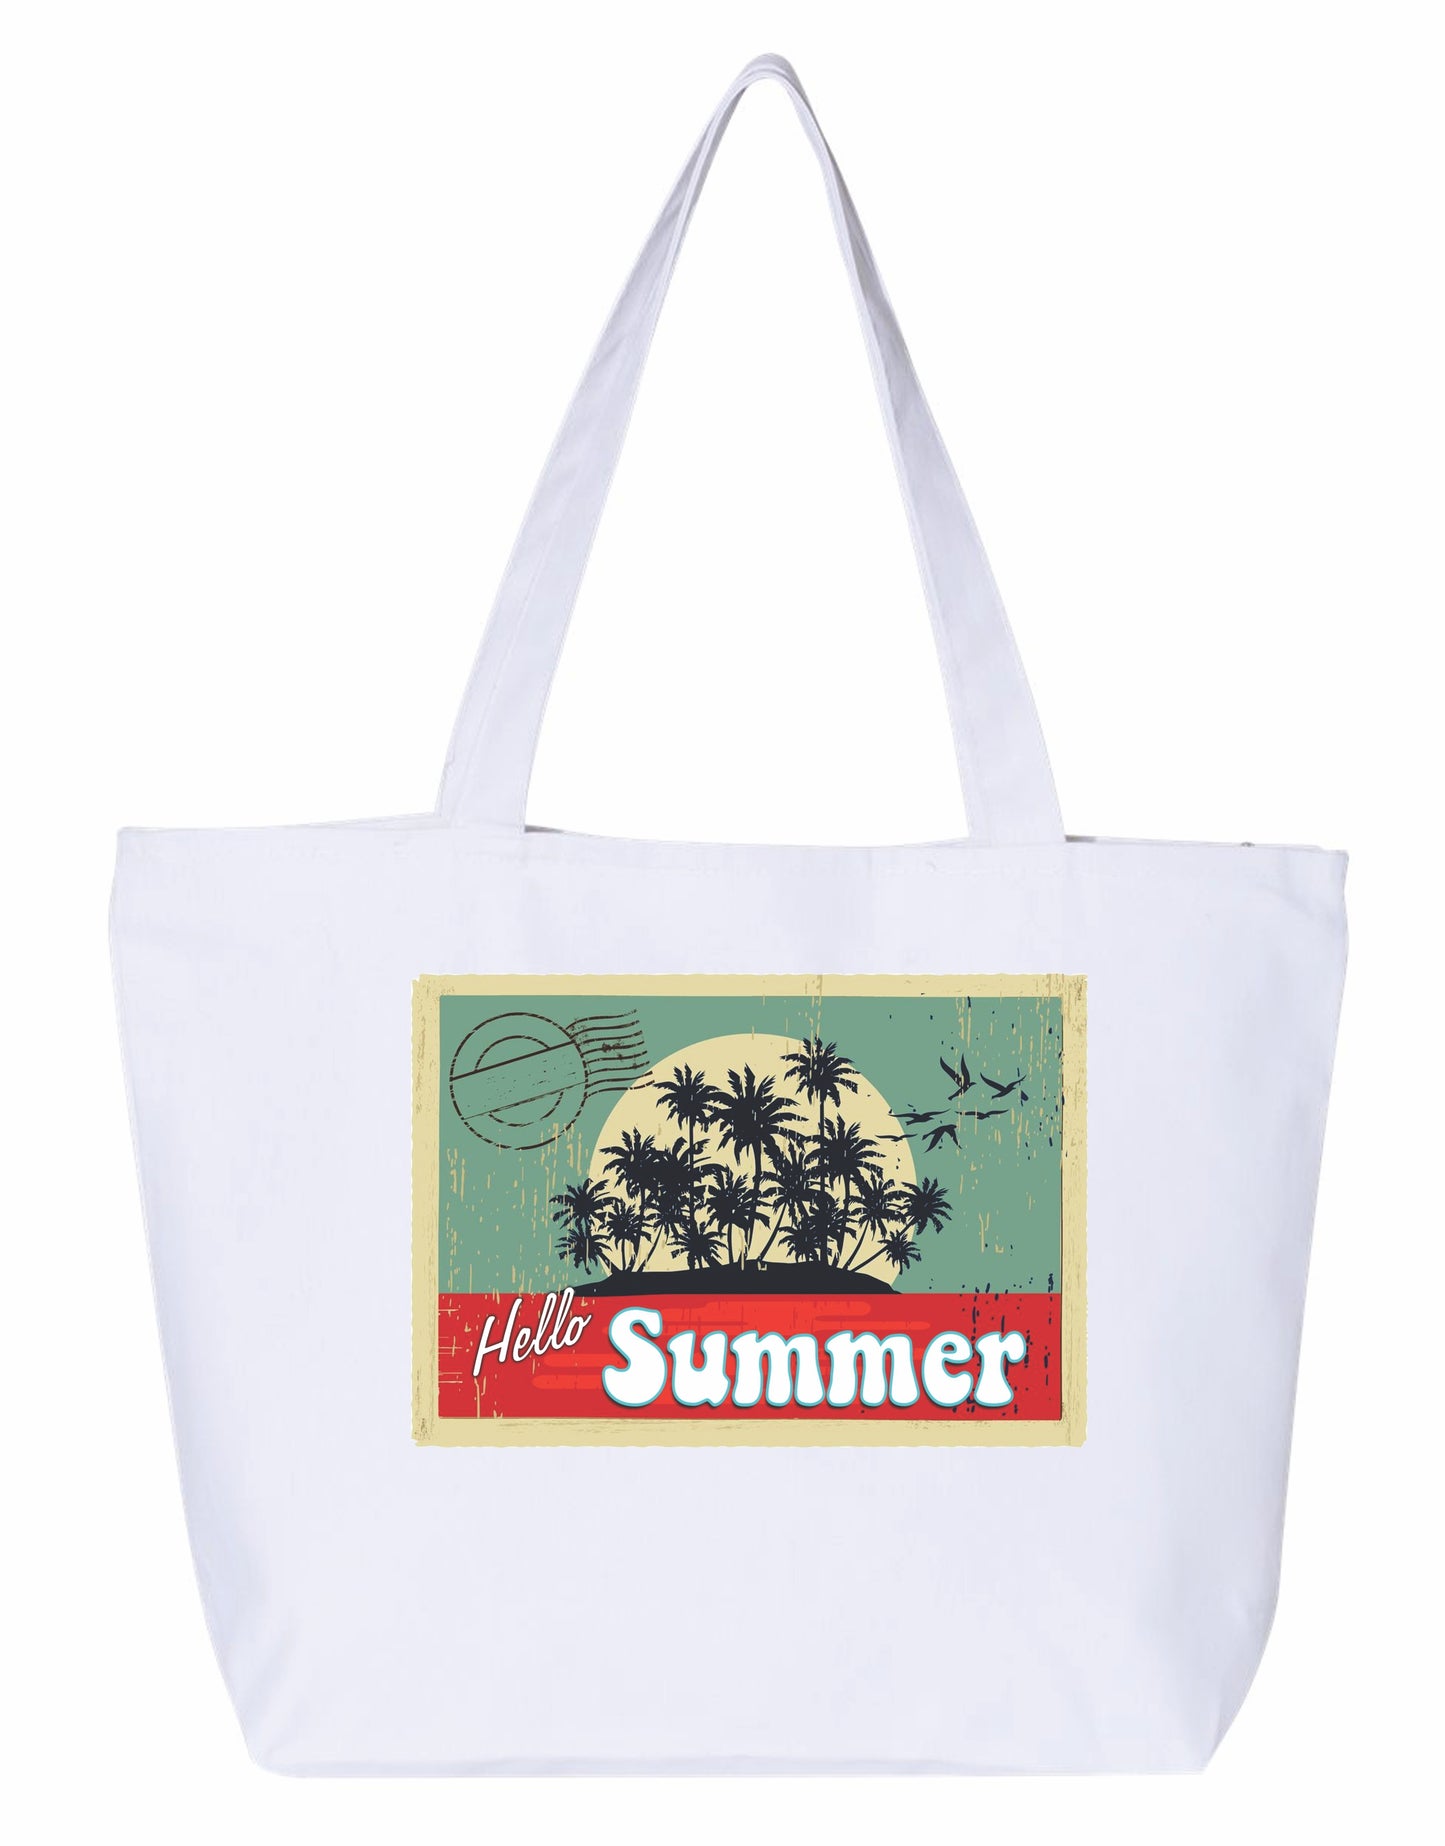 Hello Summer Heavy weight cotton canvas large zippered  tote bag